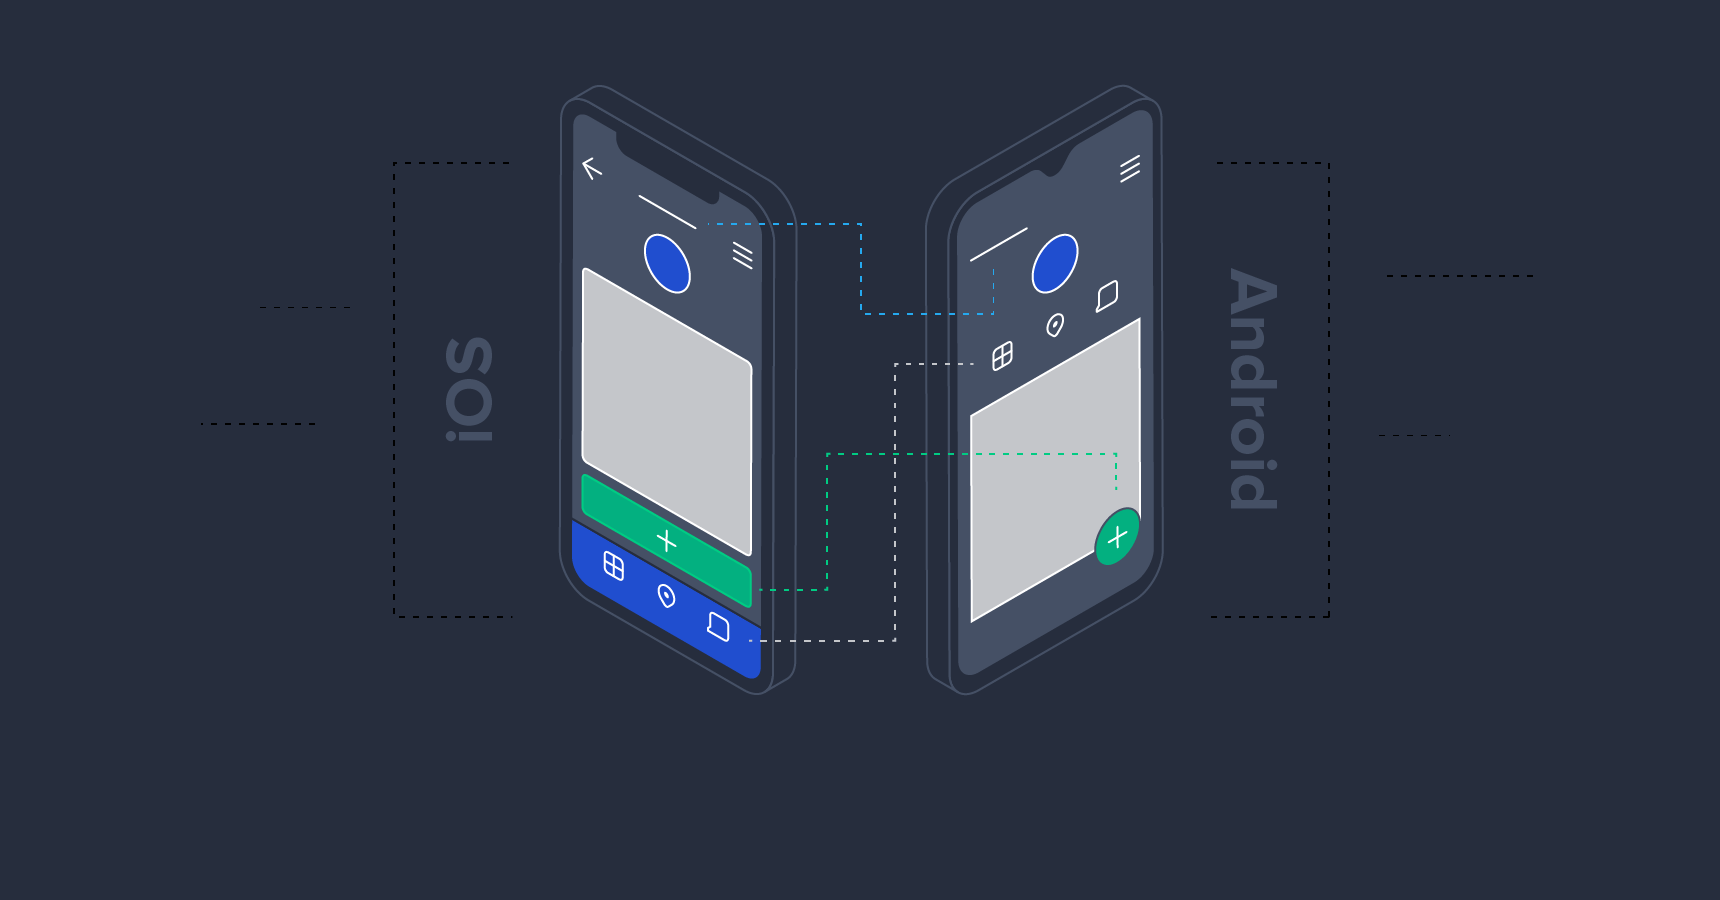 Avoiding Bad Practices in iOS and Android Design